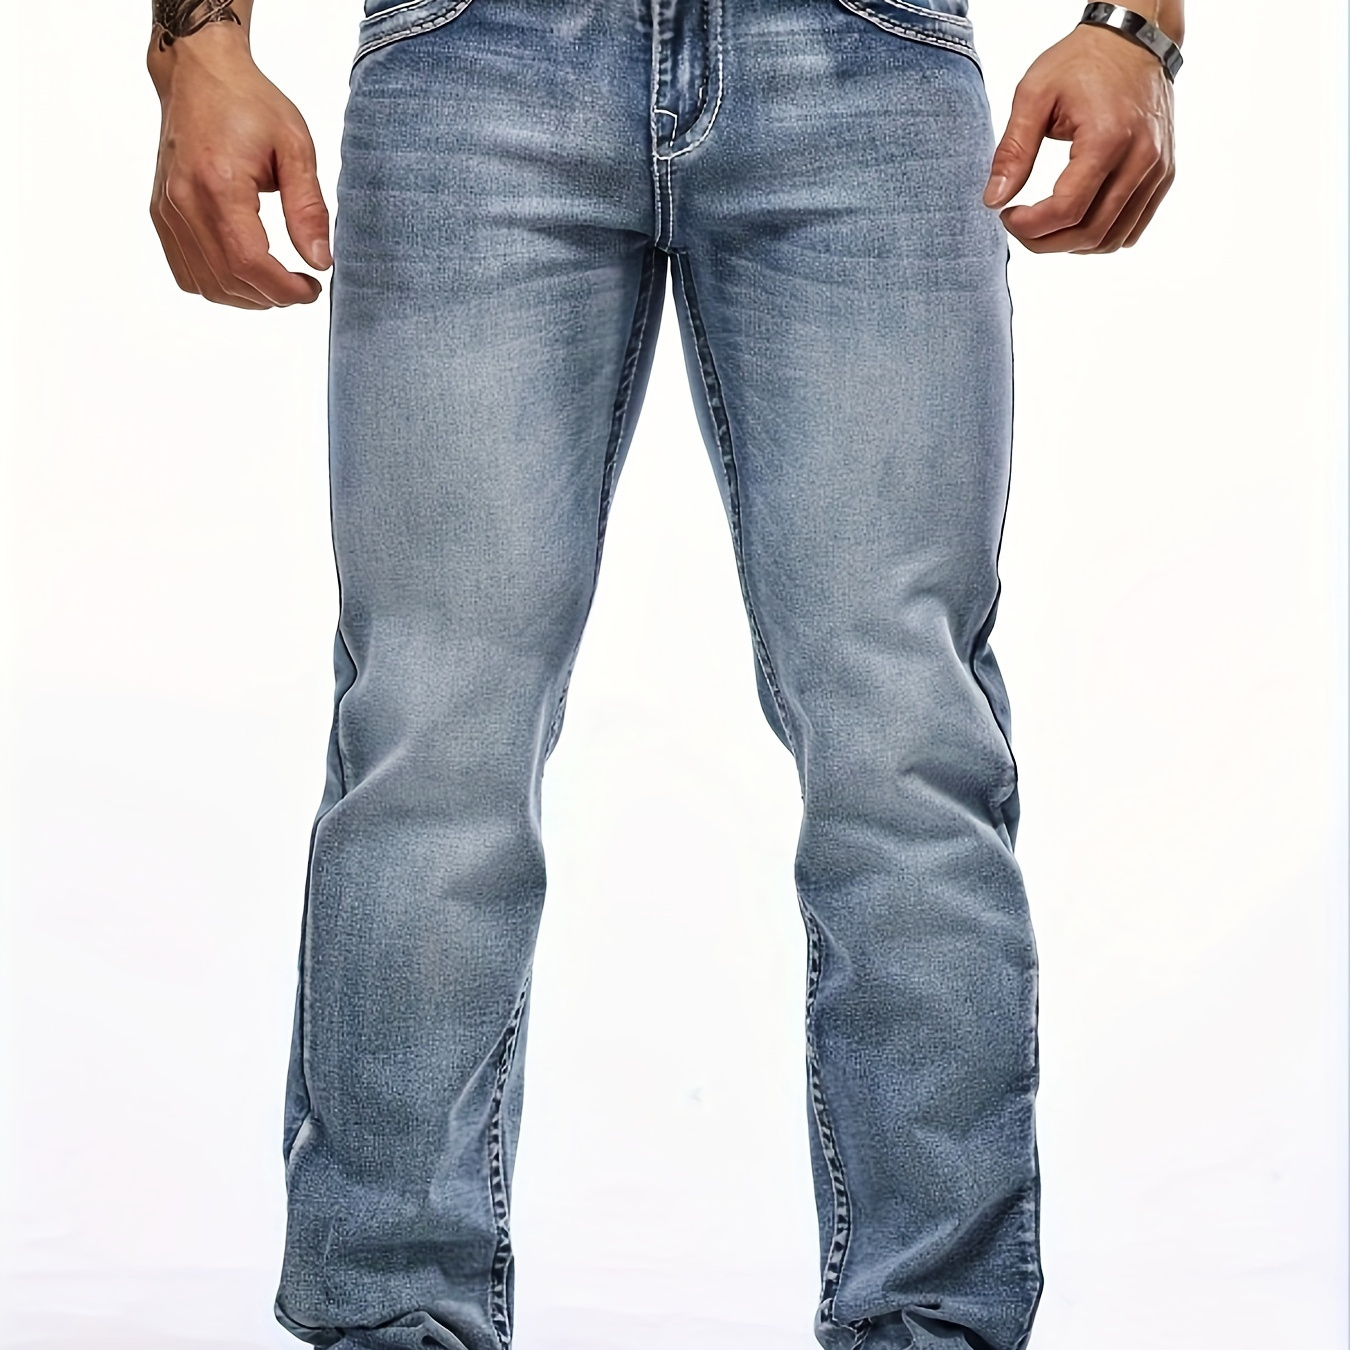 

Men's Vintage Style Denim Jeans, Casual Regular Fit Pants With Pockets, Street Style Fashion